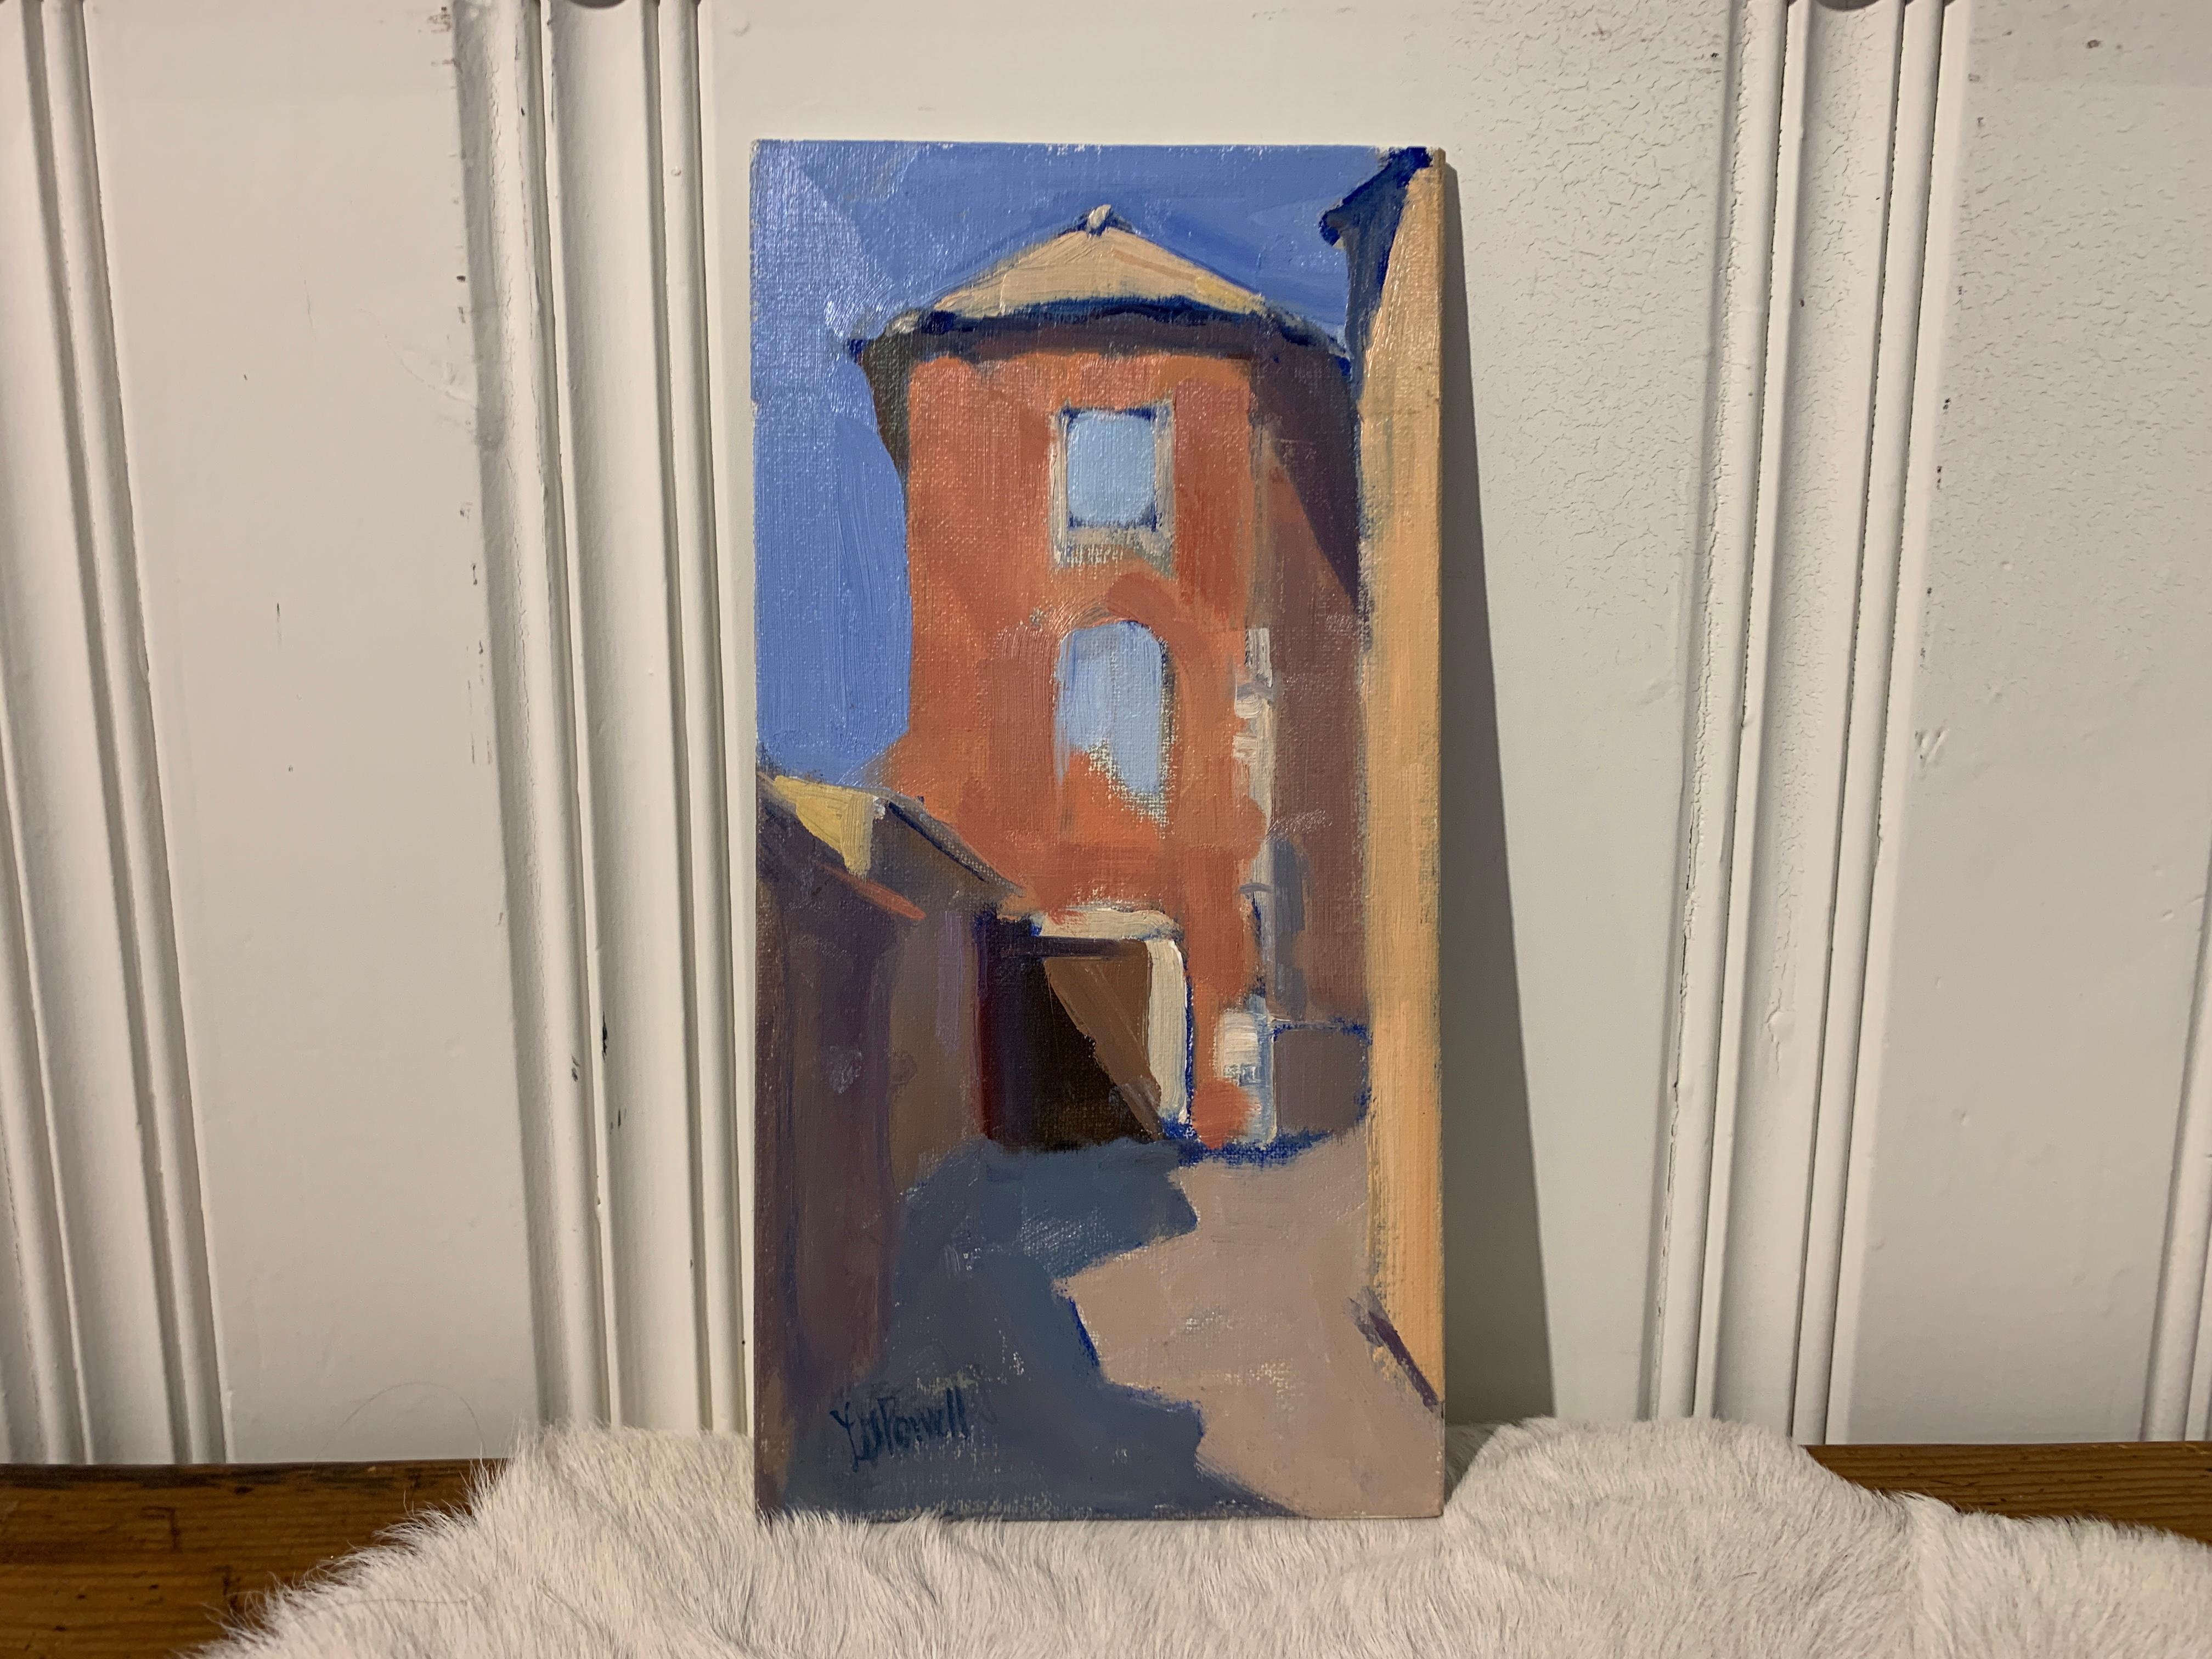 'Maison Rouge' is a small Post-Impressionist oil on linen mounted on board architectural painting of vertical format created by American artist Lesley Powell in 2019. Featuring a palette made of red, blue and beige tones and translating as 